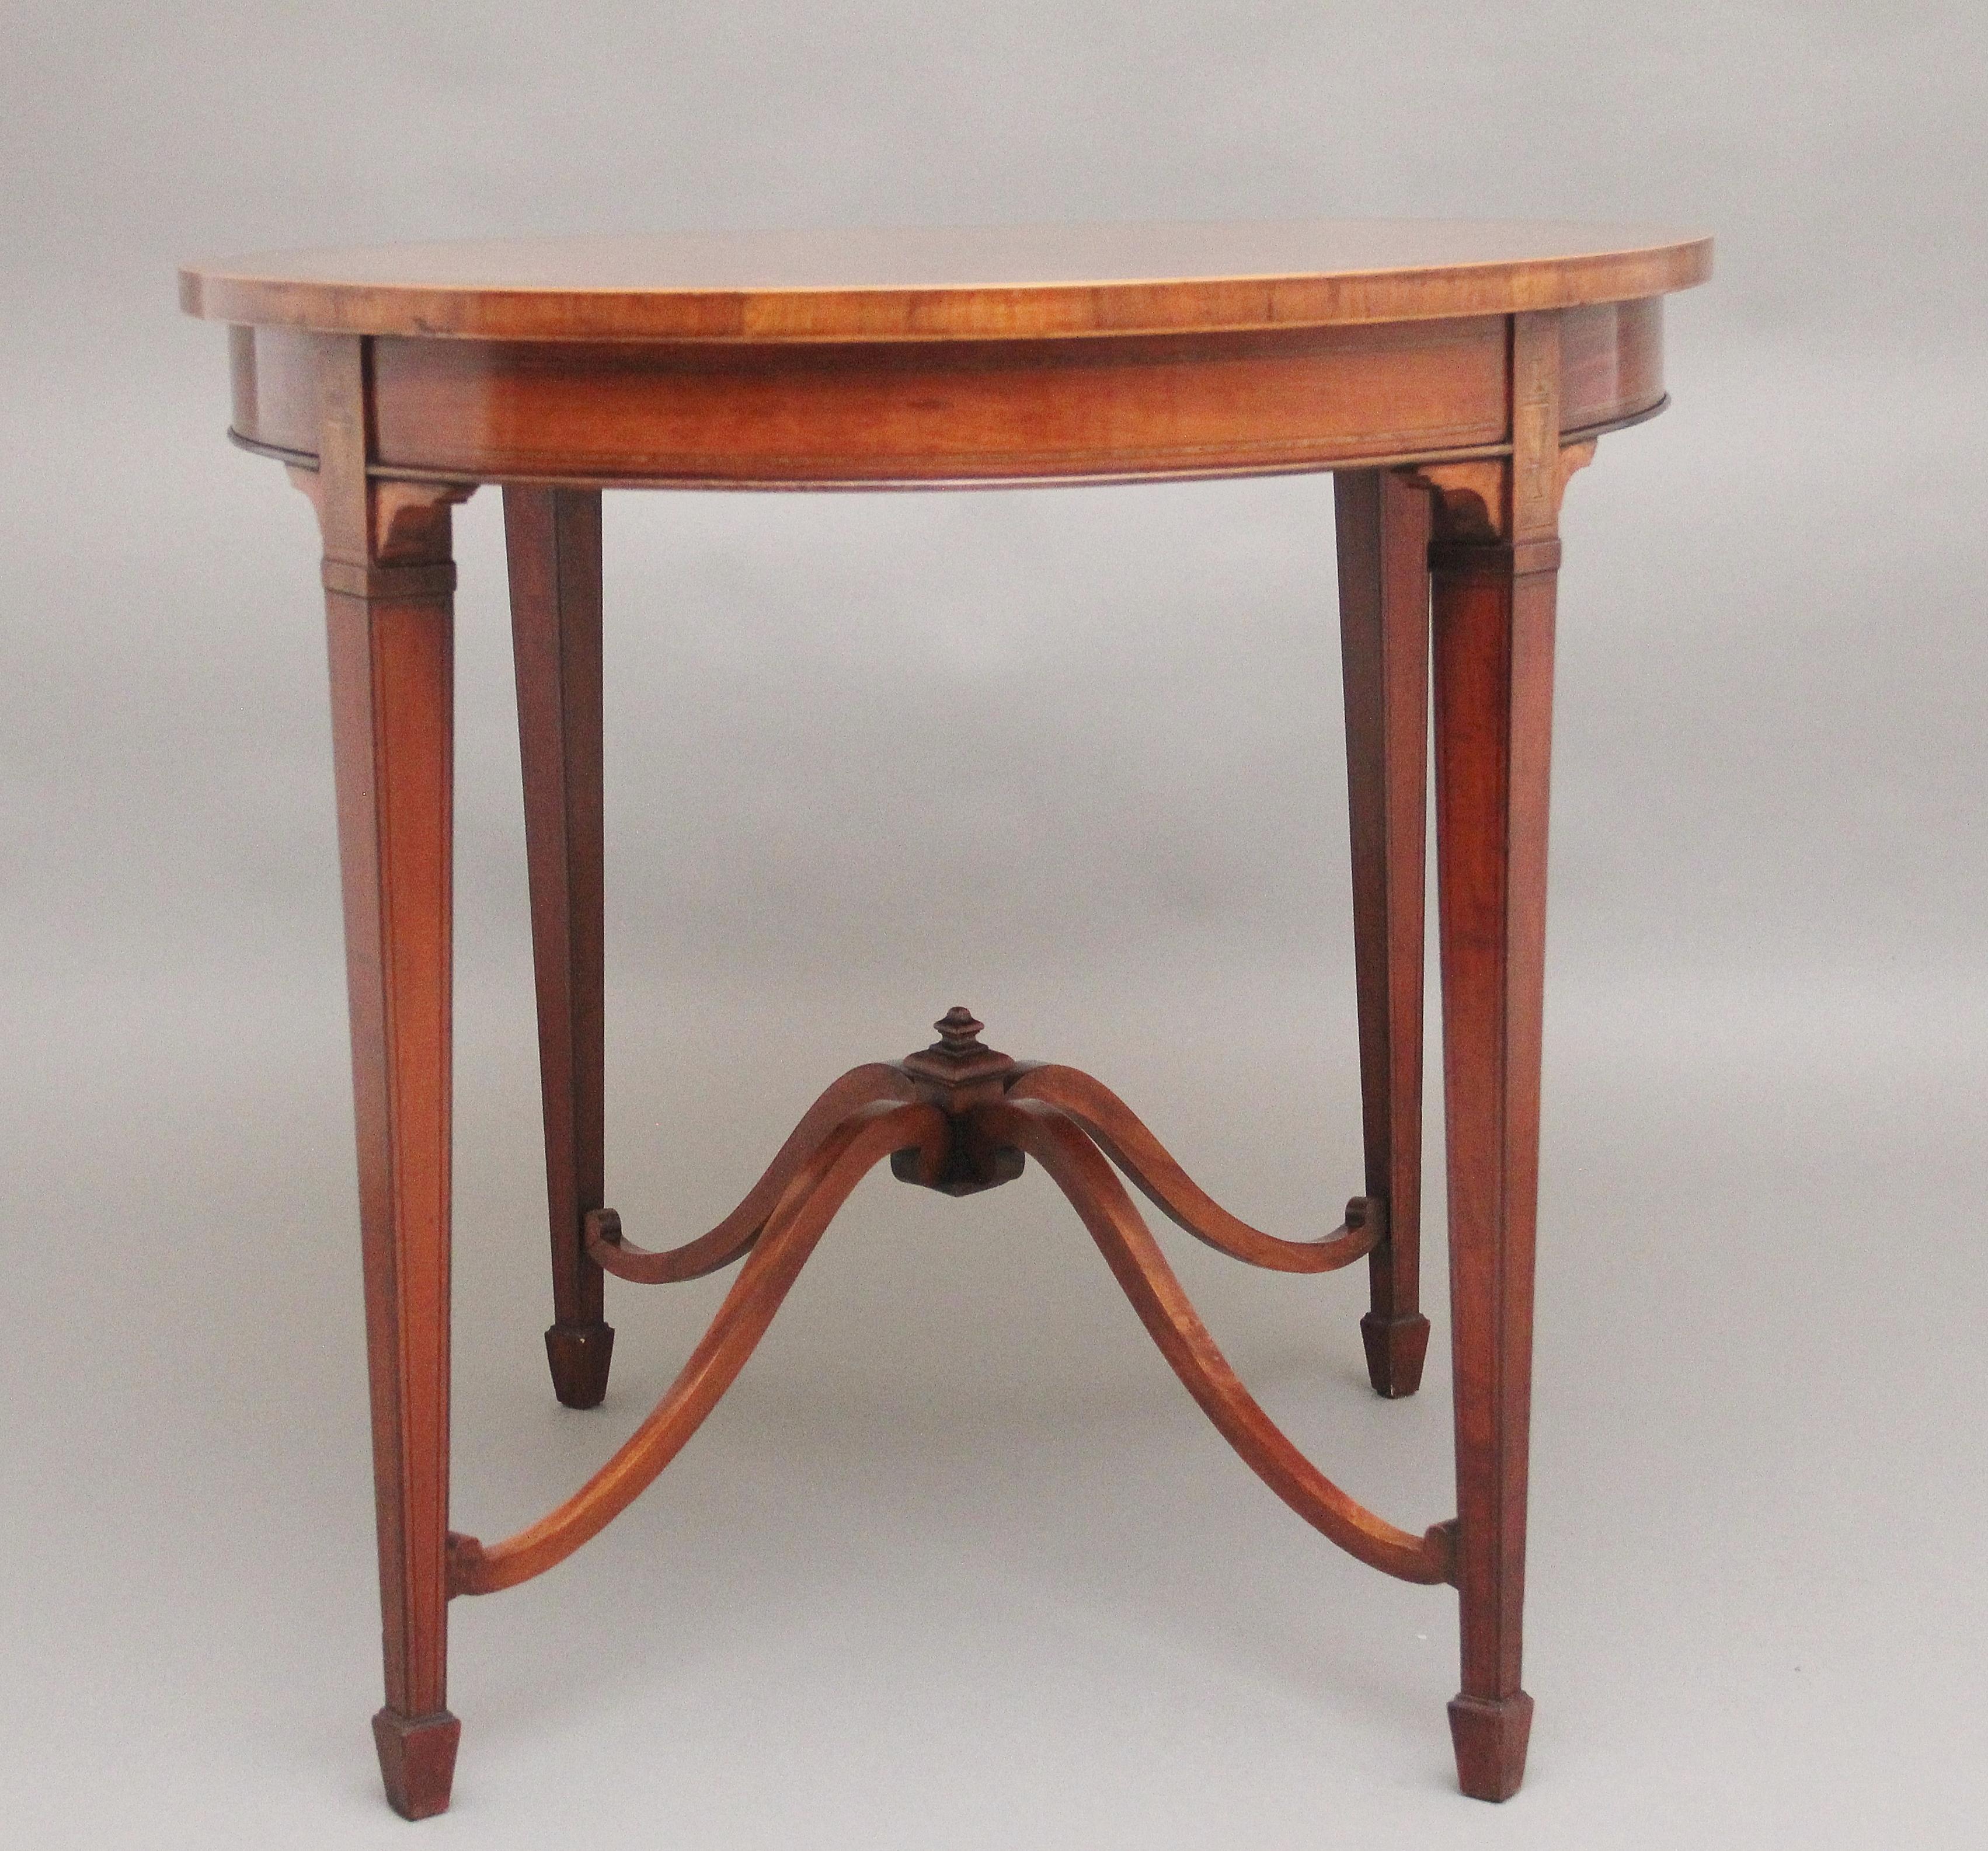 Late 19th Century 19th Century Inlaid Satinwood Table For Sale